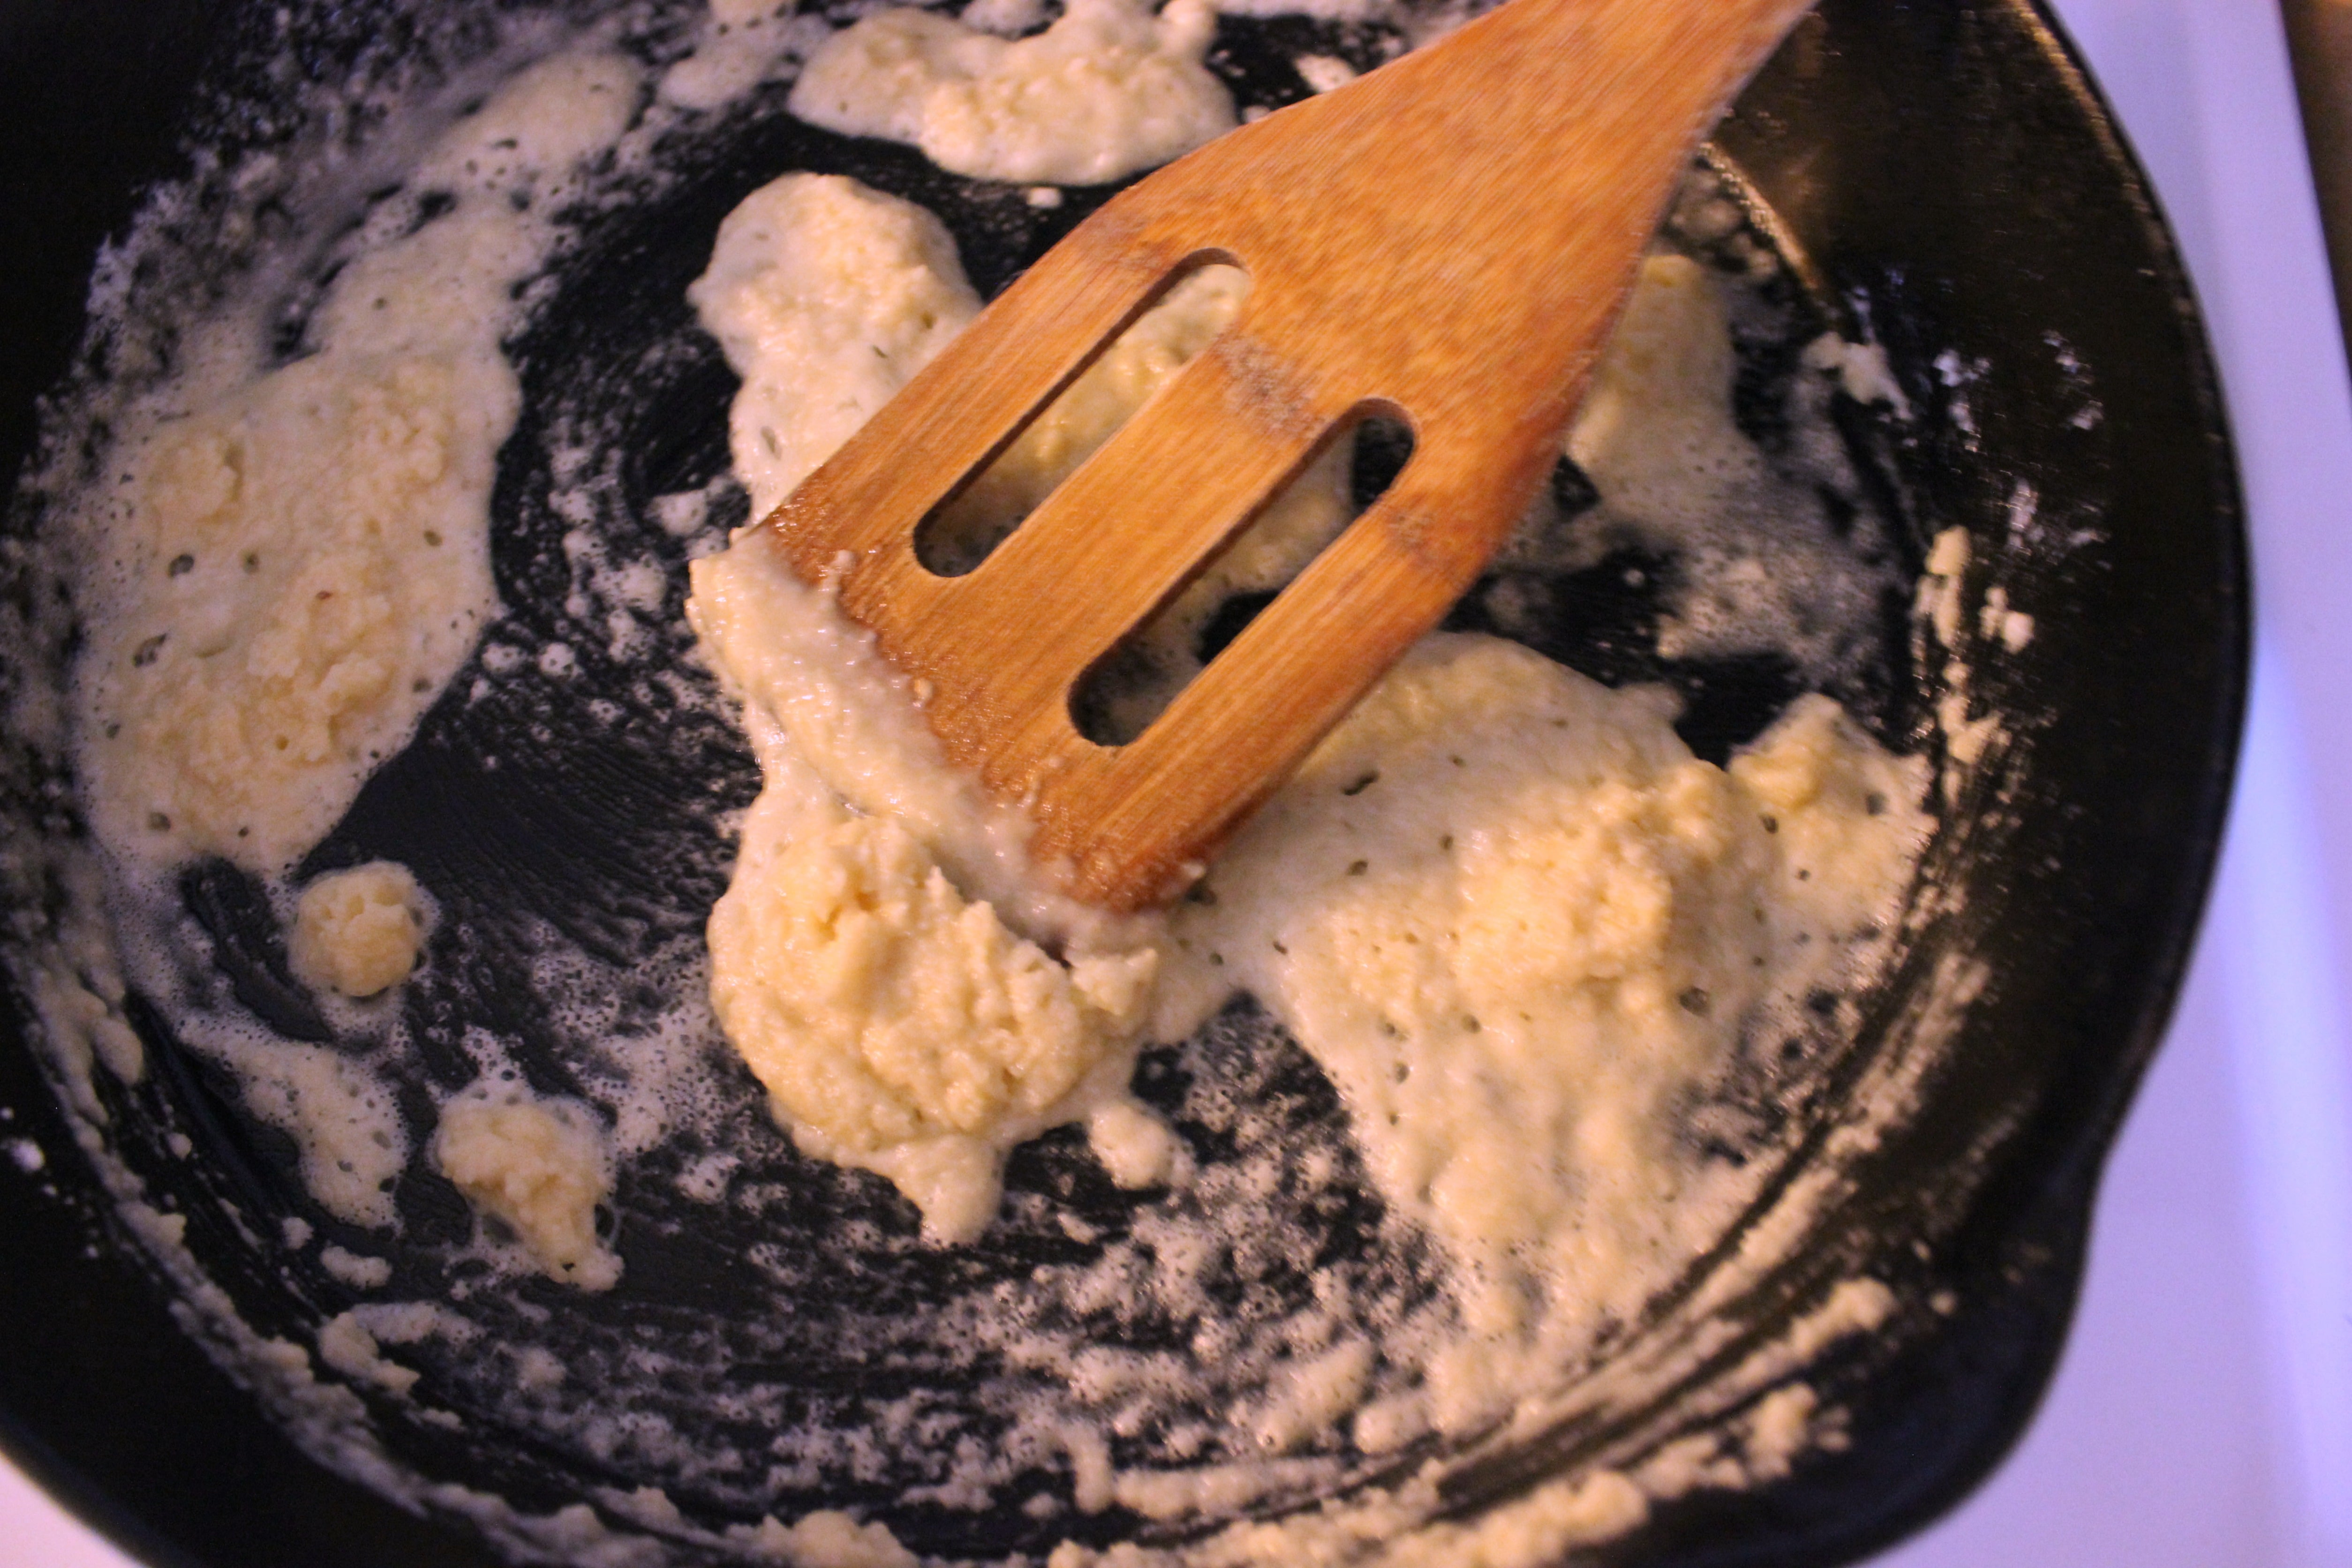 Stir in 3 tablespoons of flour to butter and create a thick paste.